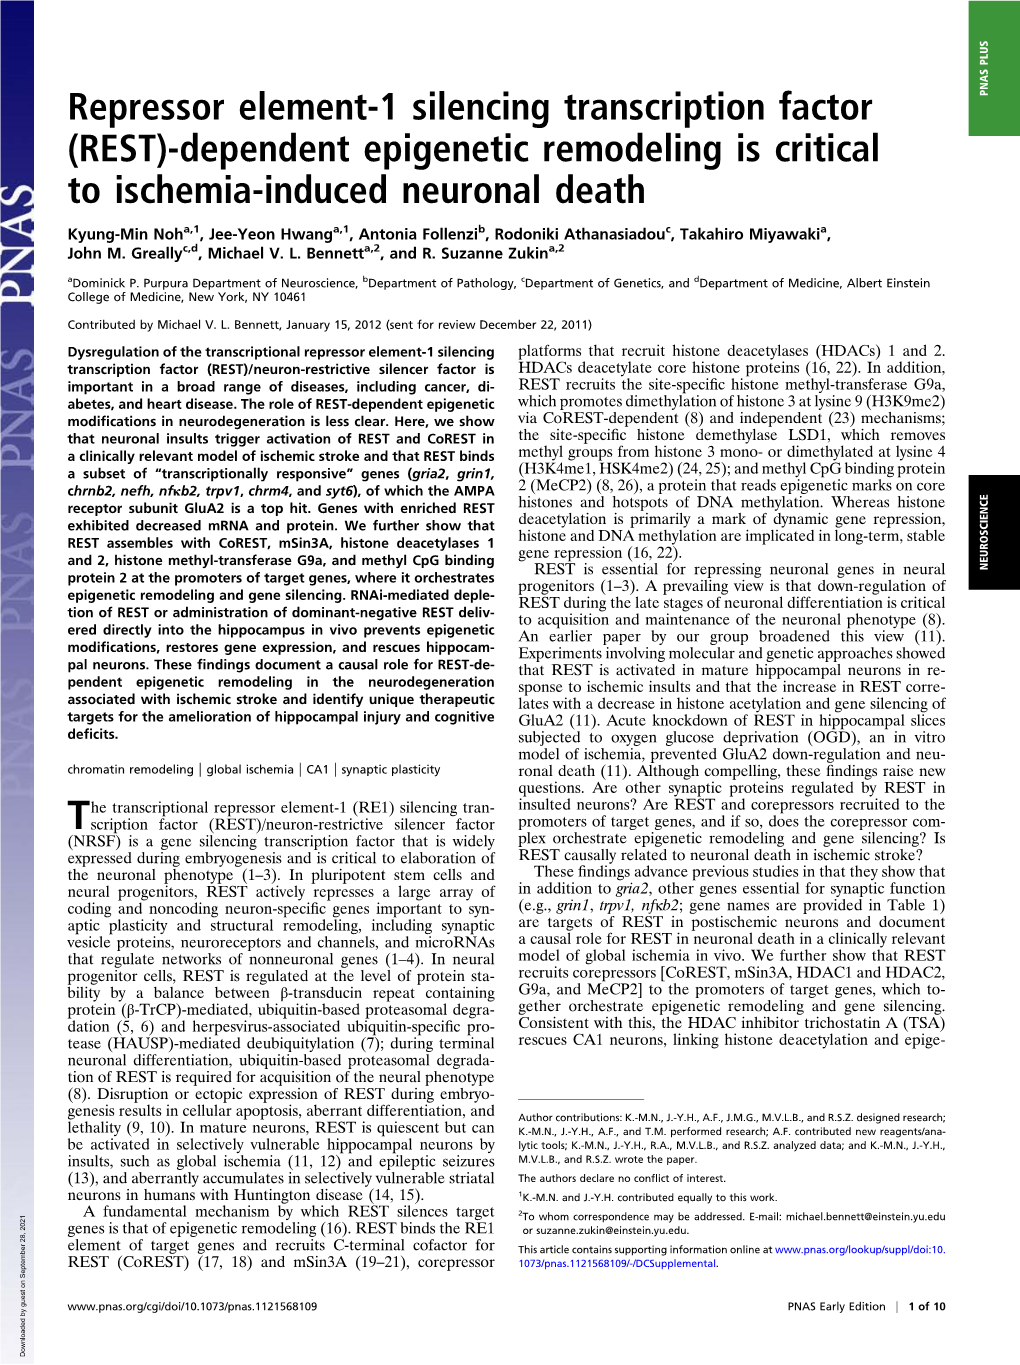 Dependent Epigenetic Remodeling Is Critical to Ischemia-Induced Neuronal Death